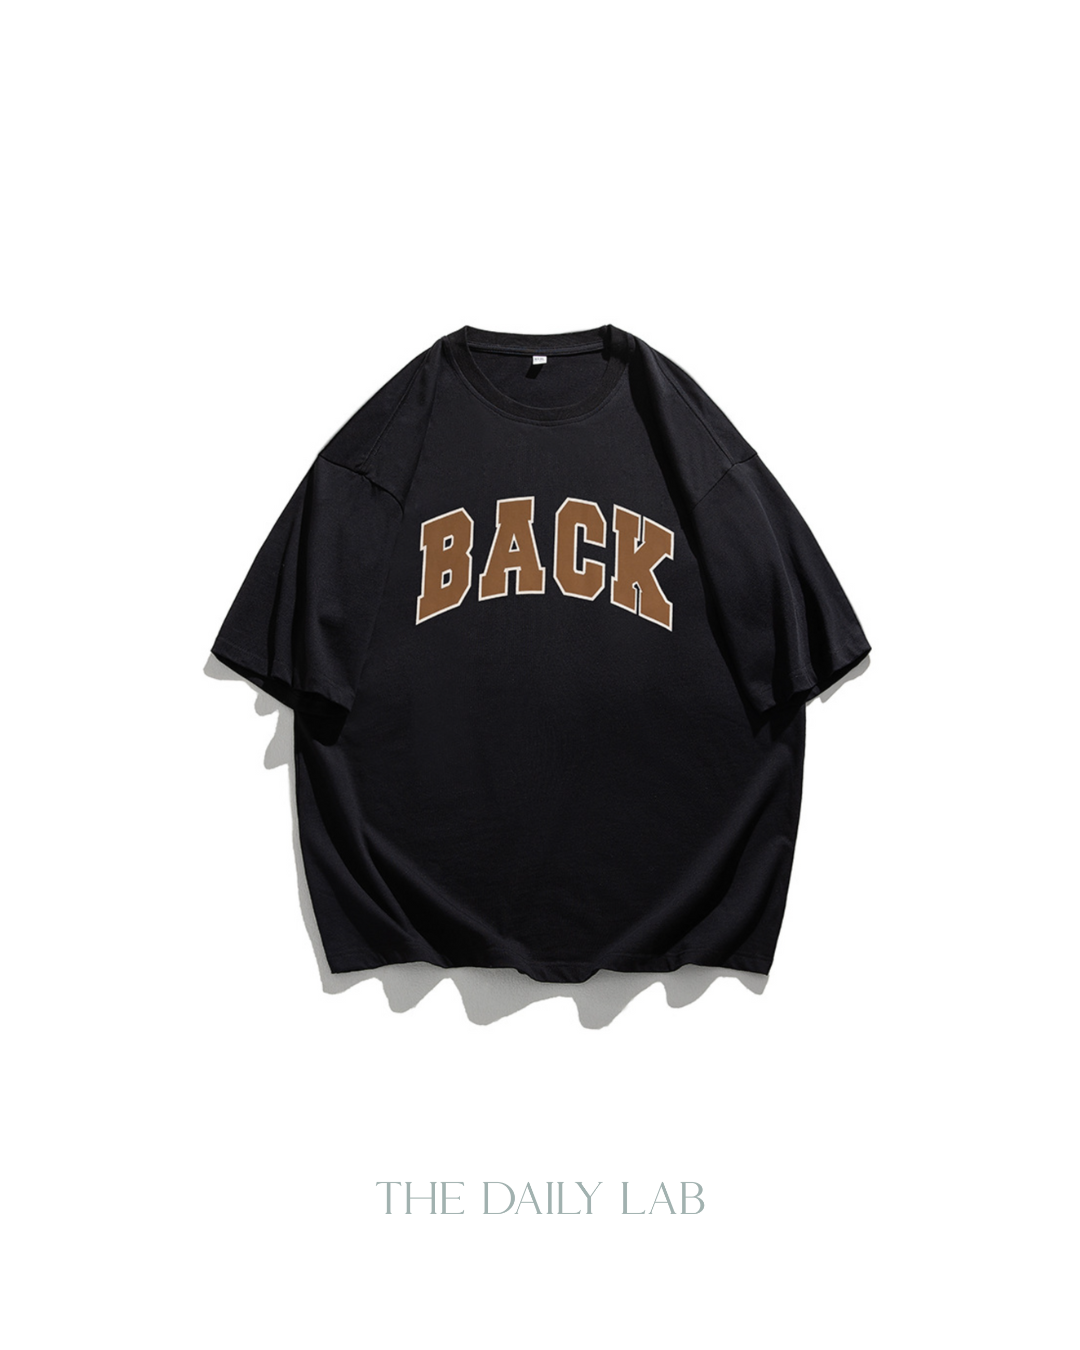 BACK Cotton Tee in Black